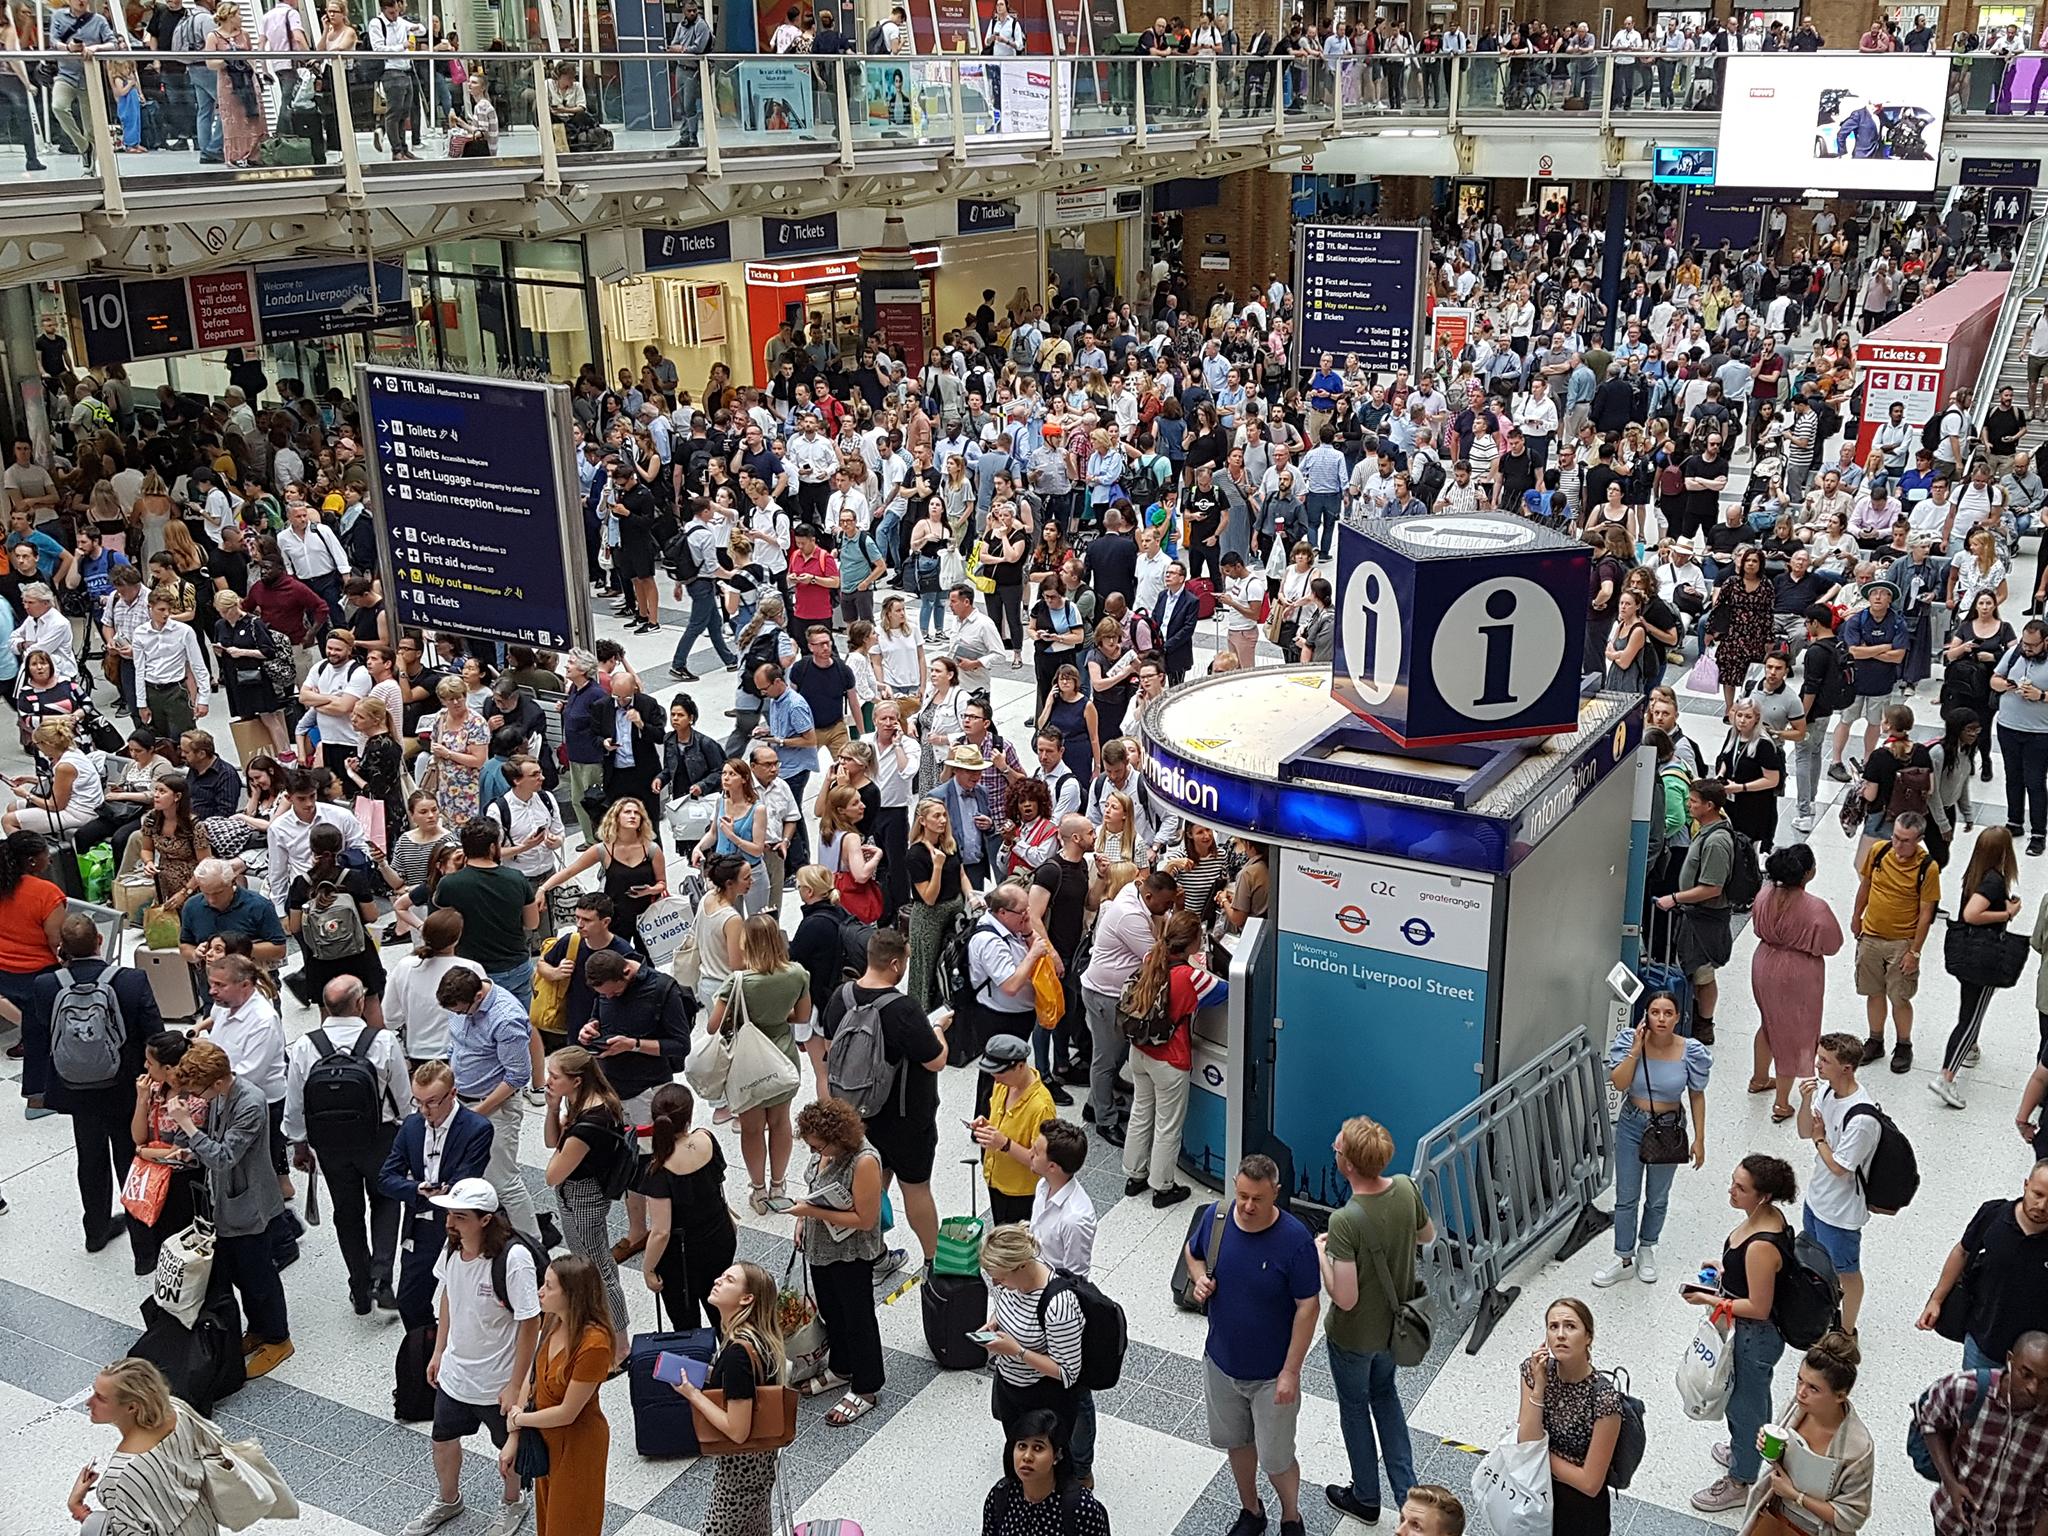 Scenes from Liverpool Street station show commuters bearing up under the (less than) chaotic disruption